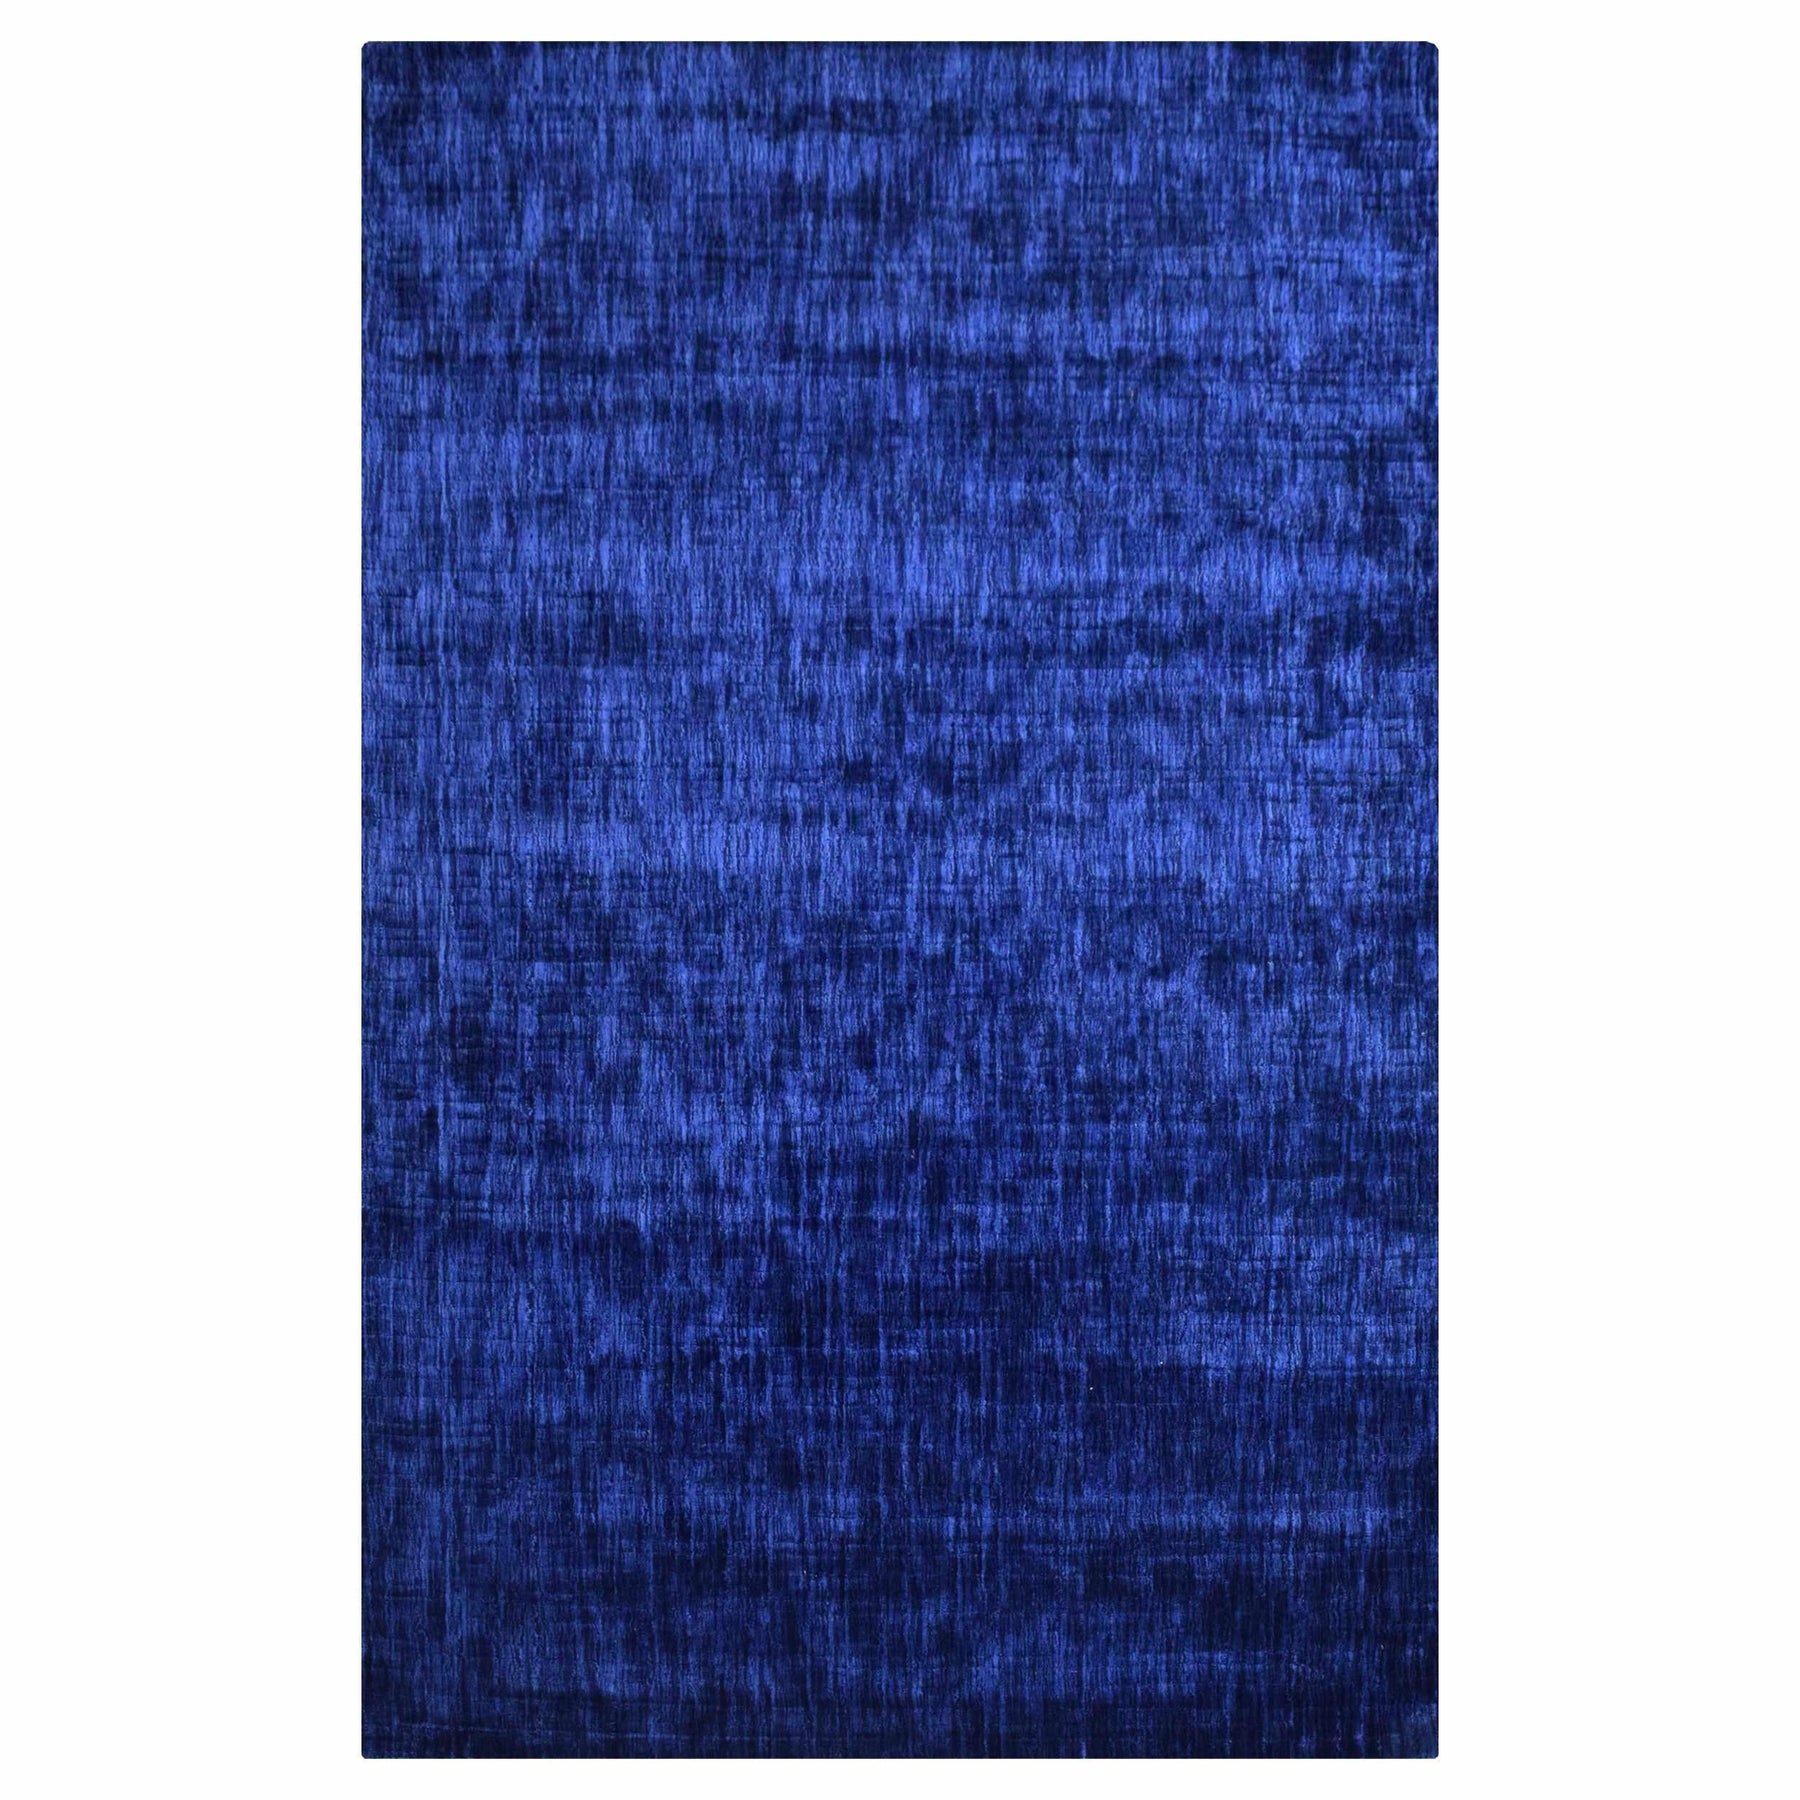 Superior Chalkboard Hand-Woven Viscose Modern Abstract Indoor Area Rug, 5 ft. x 8 ft - Navy Blue